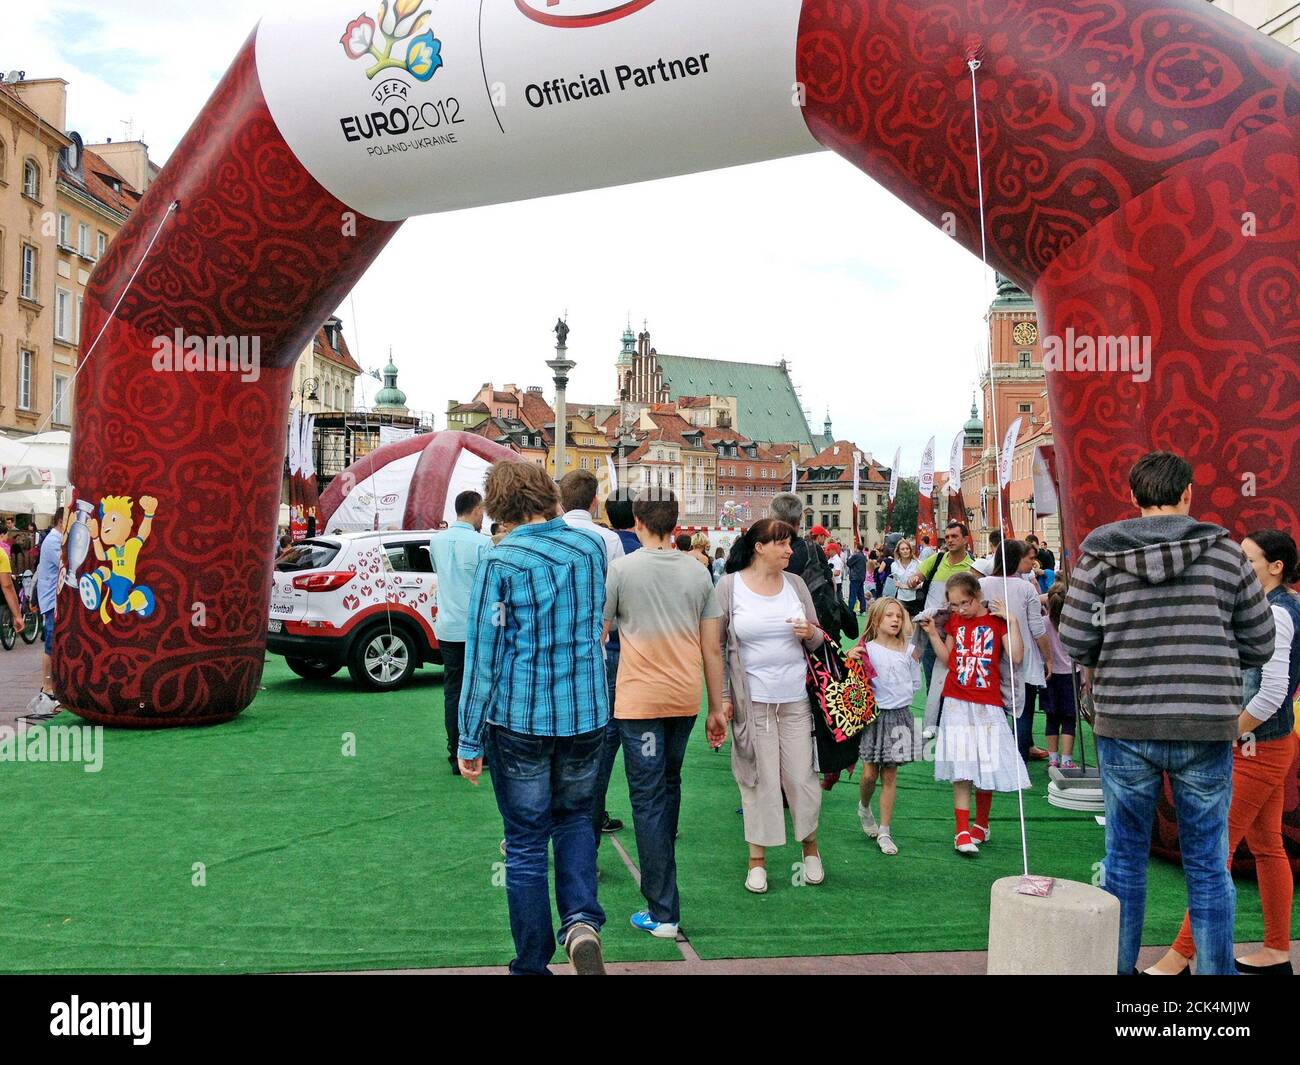 Visitors to the Old Town in Warsaw, Poland, take part in activities surrounding the co-hosting of the European Football Championship 2012. Stock Photo